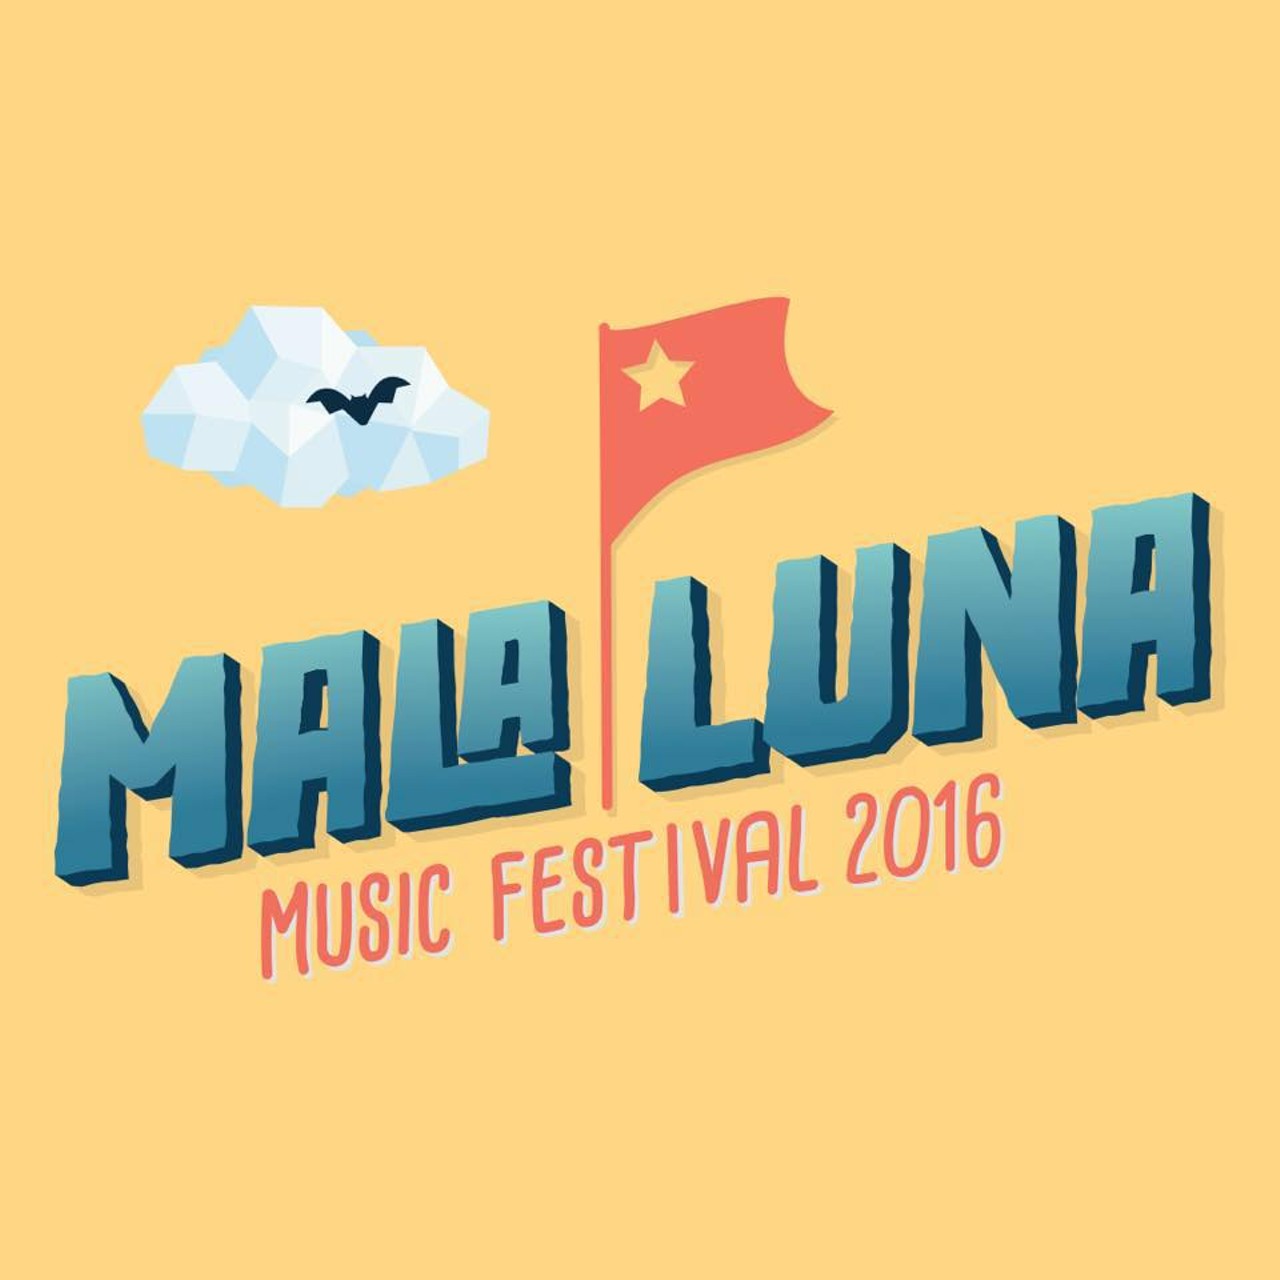  Mala Luna Music Festival 
Oct. 29-30 at the Lone Star Brewery
Featuring Kaskade, Travis Scott, G-Eazy, Steve Aoki and several more.
Photo via Facebook,  Mala Luna Music Festival